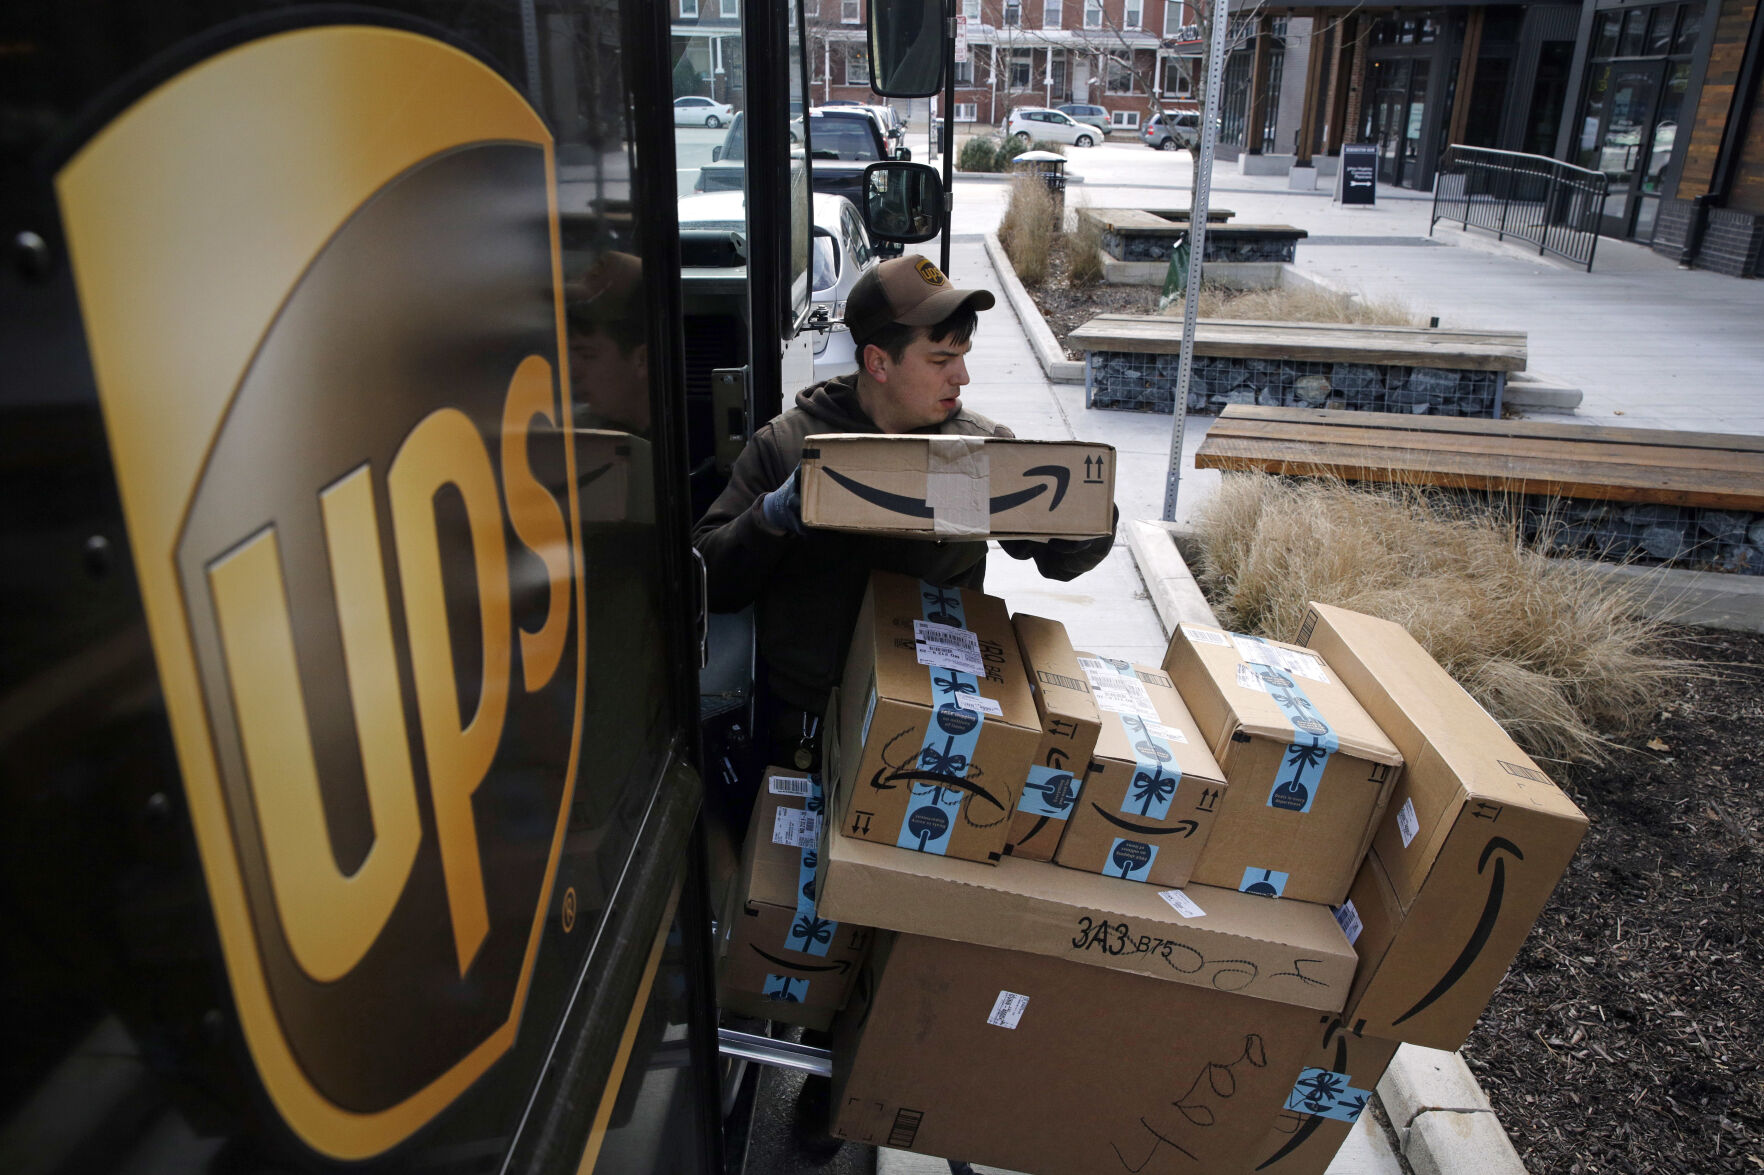 <p>FILE - A UPS driver prepares to deliver packages in Baltimore, Md., Dec. 19, 2018. UPS plans to hire more than 100,000 workers _ at higher pay than a year ago _ to help handle the holiday rush this season, in line with hiring the previous three years. (AP Photo/Patrick Semansky, File)</p>   PHOTO CREDIT: Patrick Semansky 